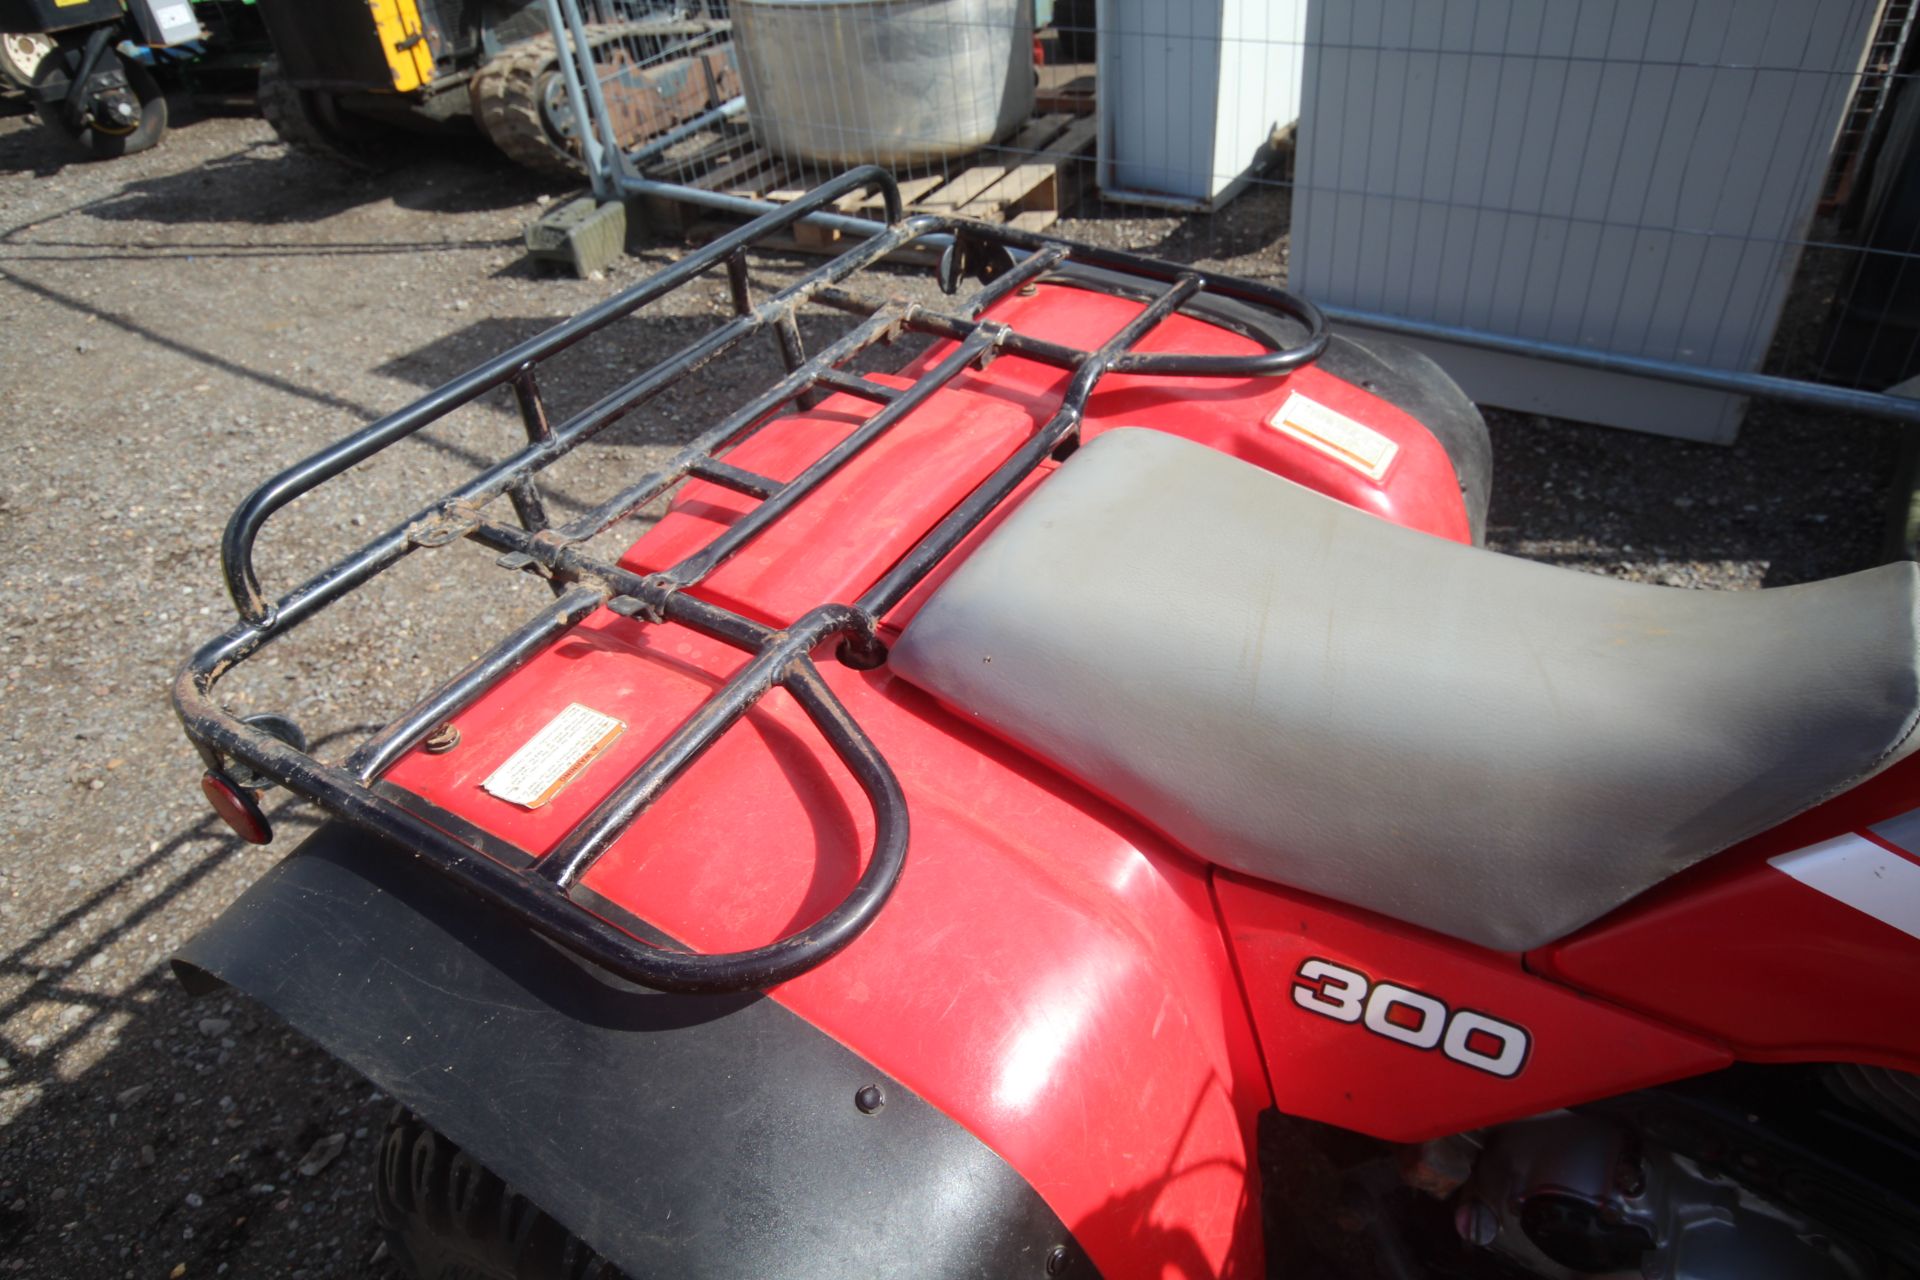 Honda Big Red 300 2WD quad bike. 1992. Owned from new. Key held. V - Image 22 of 24